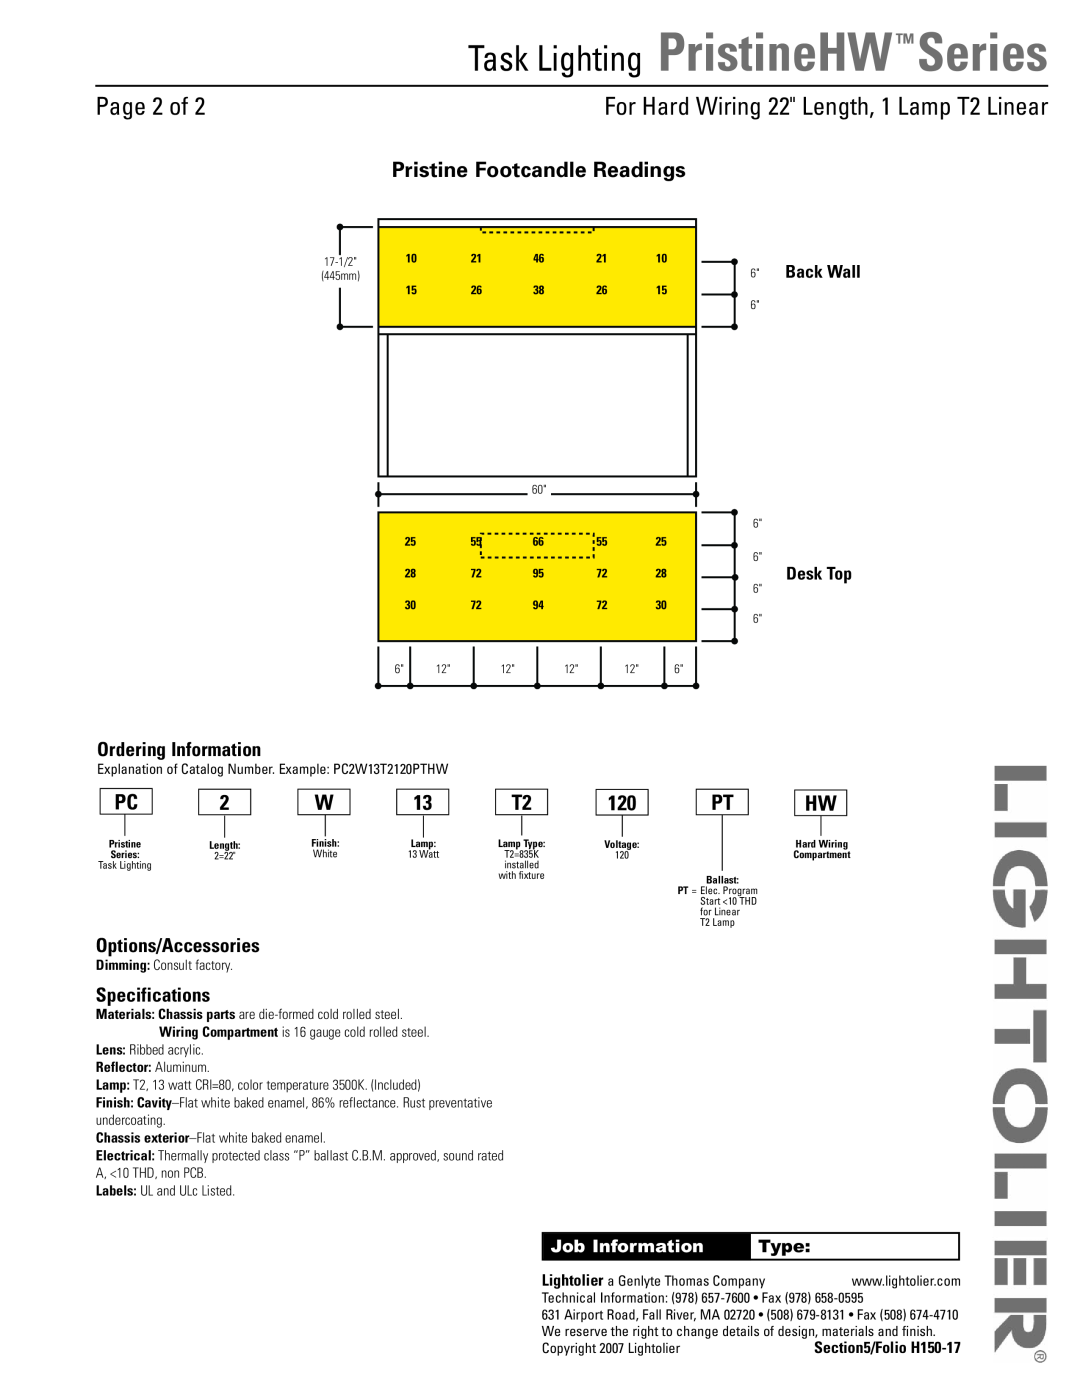 Lightolier PristineHW Series Page 2 of, Ordering Information, Options/Accessories, Specifications, Back Wall Desk Top 